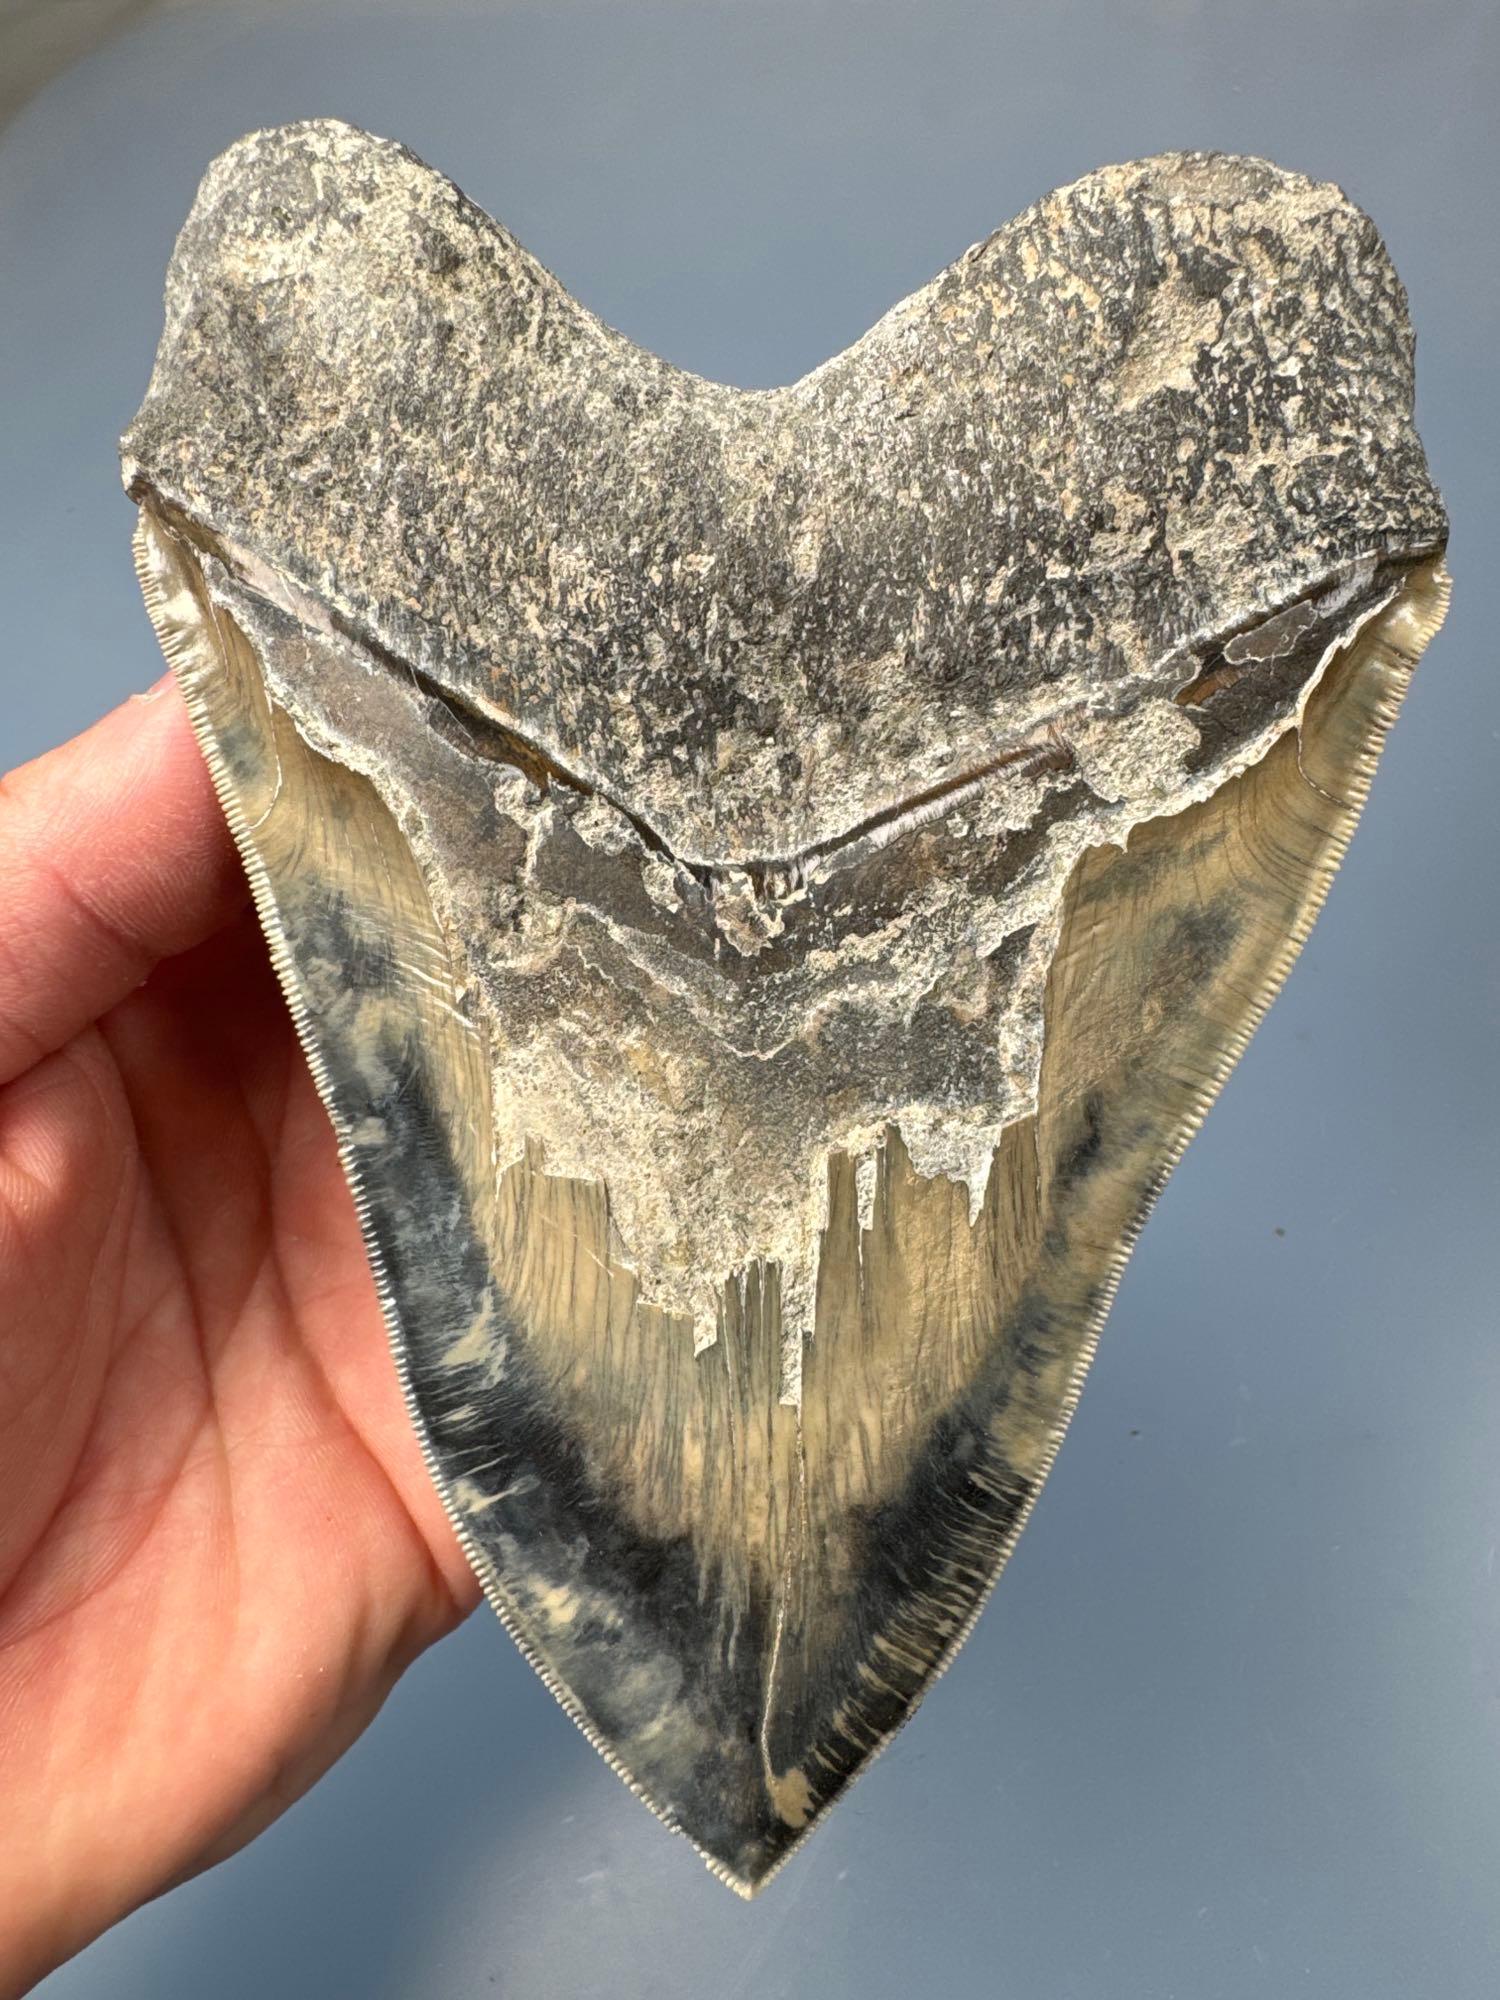 HUGE 5 7/8" Megalodon, Deep Blues, Gray Coloration, Nice Serrations, One of the Better Examples!